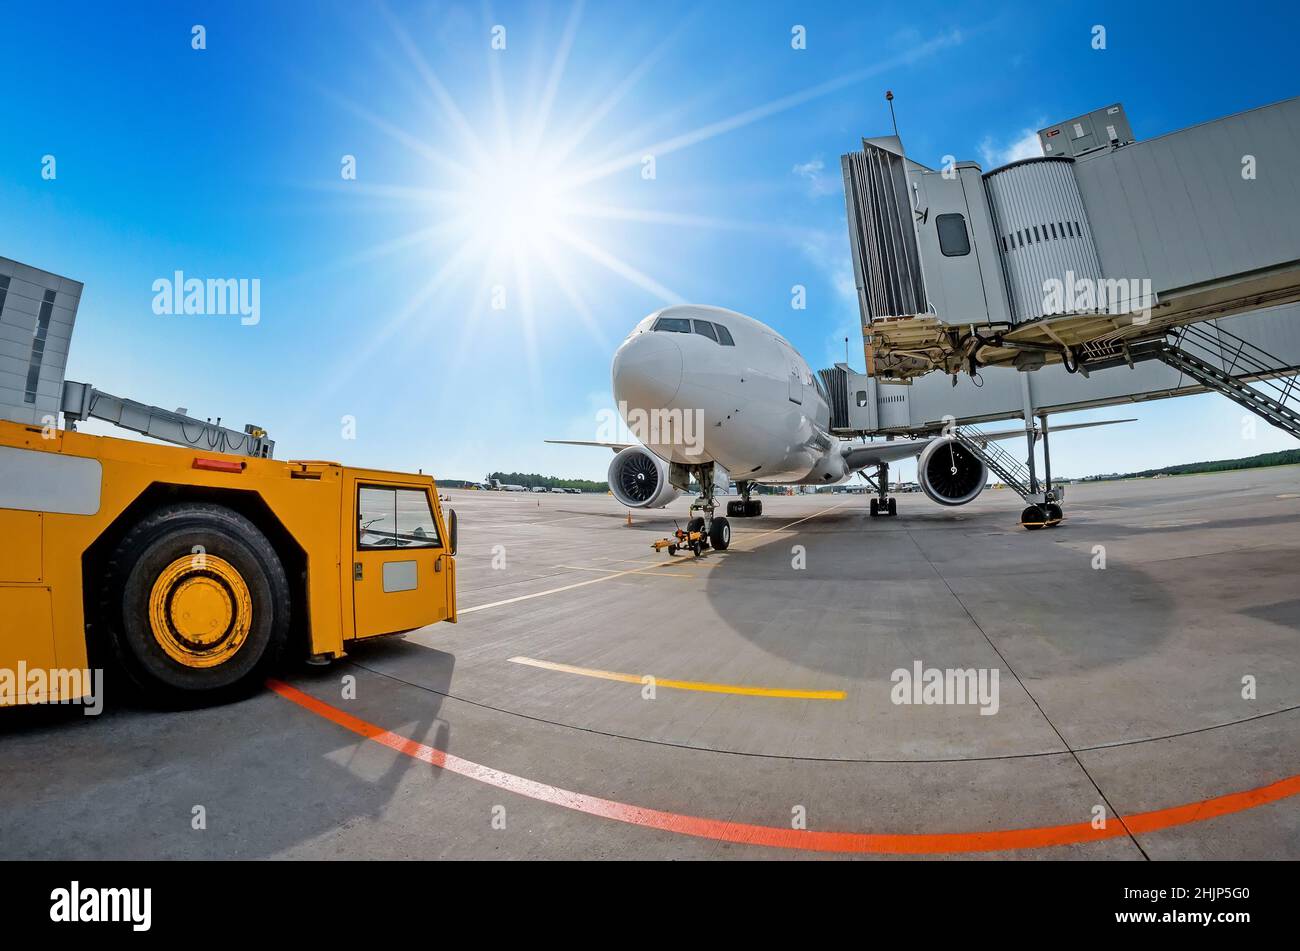 Parking at the airport, airplane at the teletrap. Aerodrome tractor is ready for towing and departure of the aircraft. Against the background of a blu Stock Photo